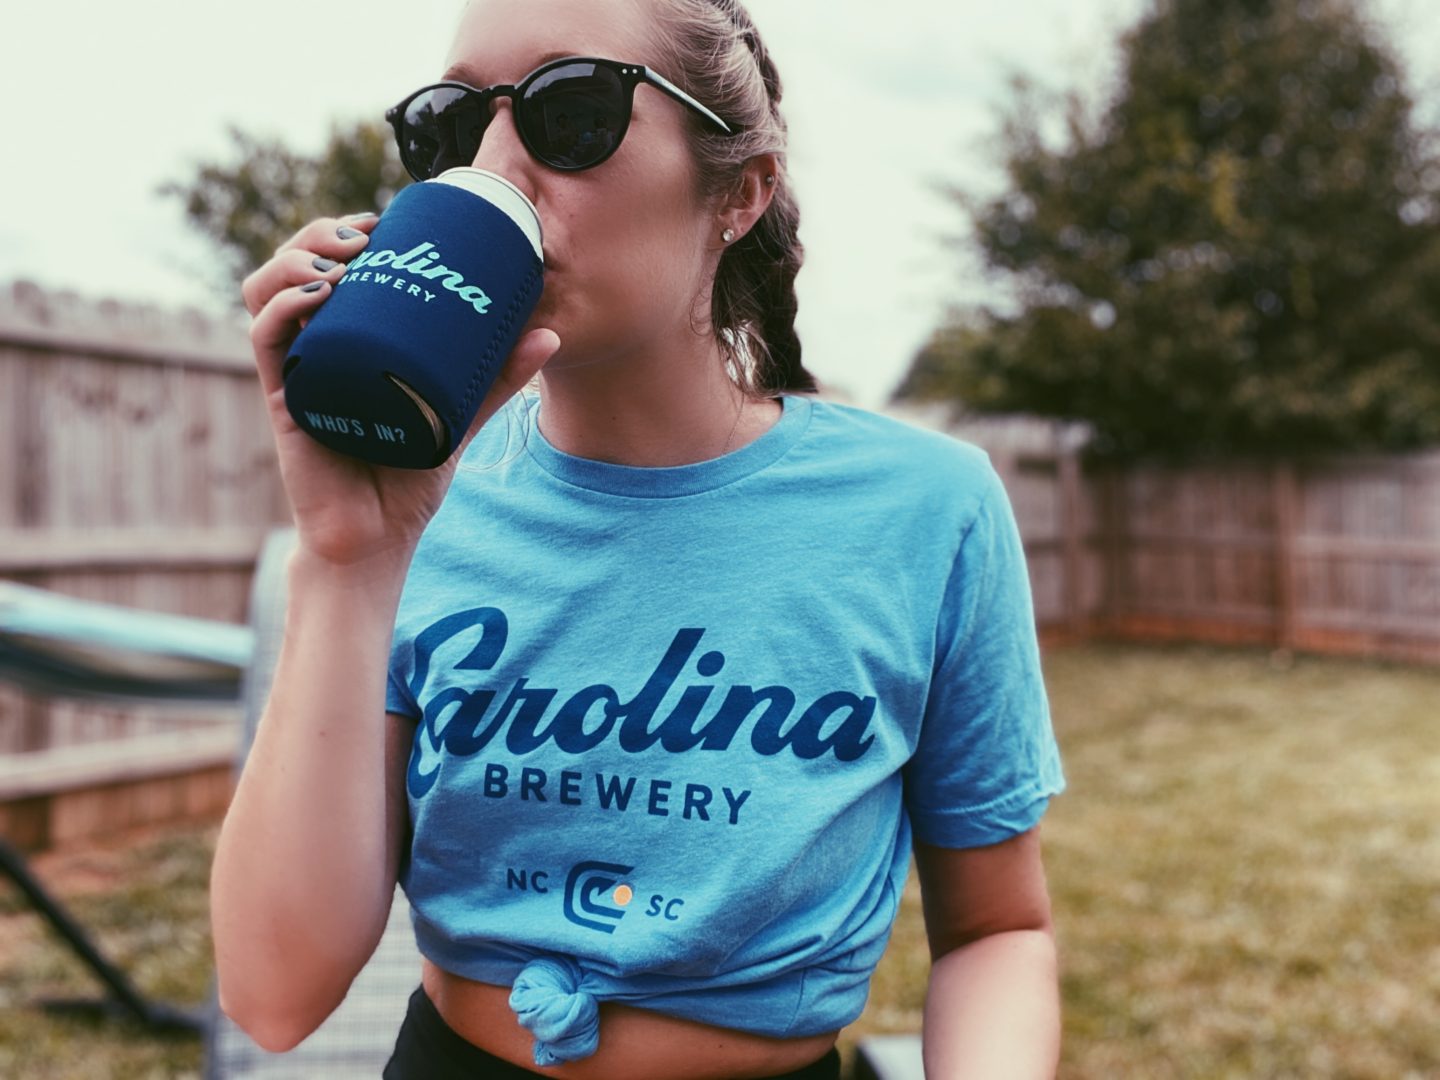 Who’s In with the Carolina Brewery